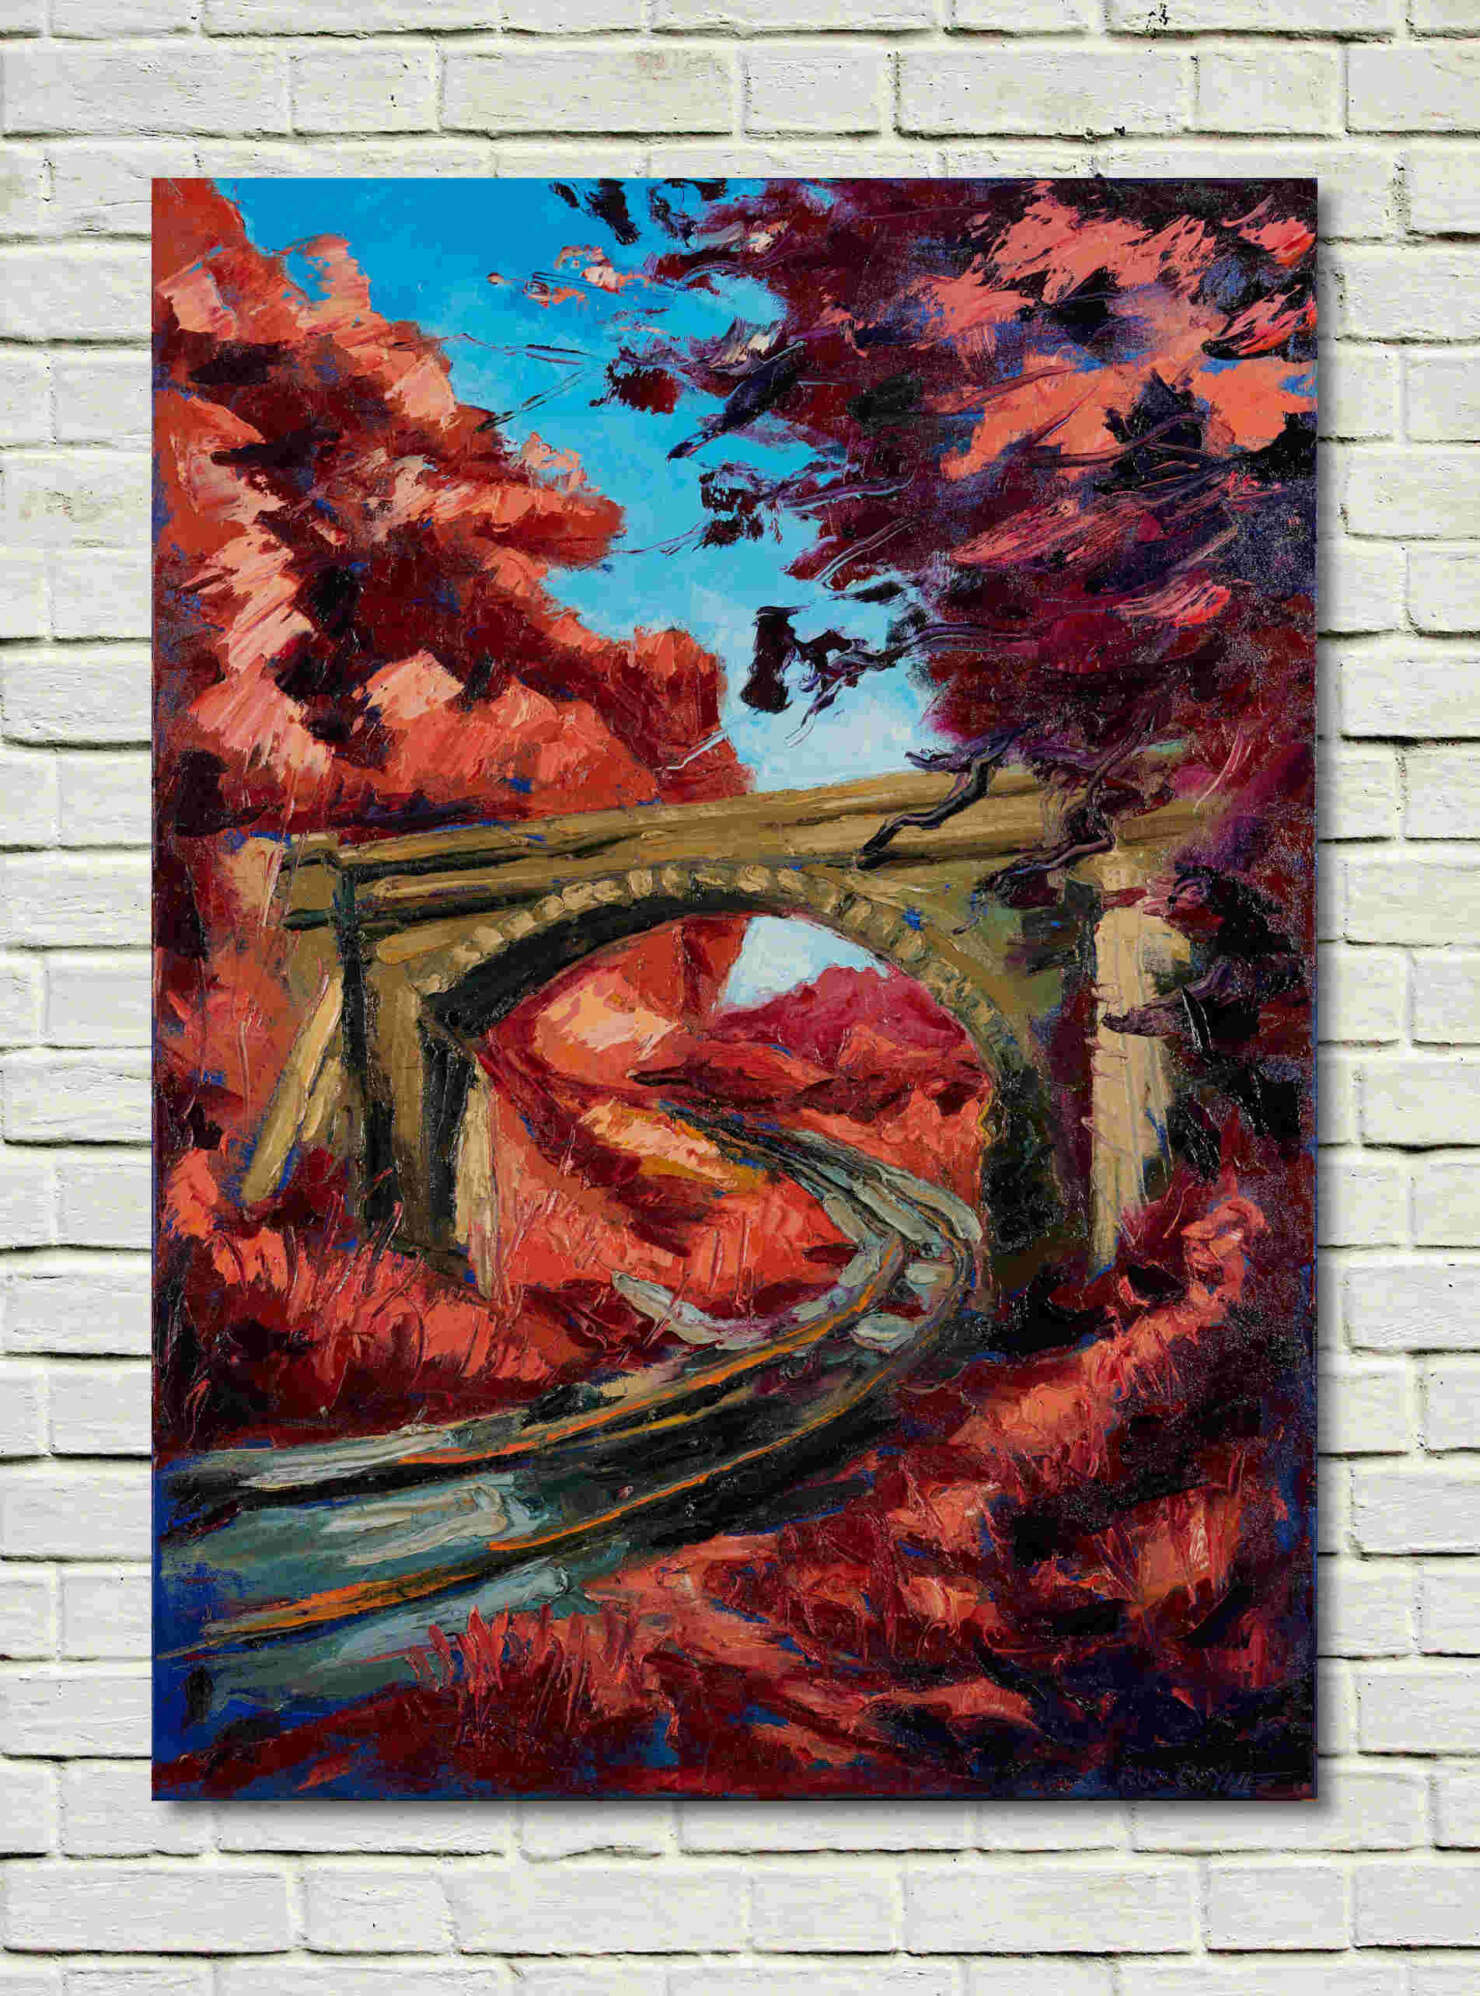 artist rod coyne's landscape "Lion's Arch" is shown here on a white wall.